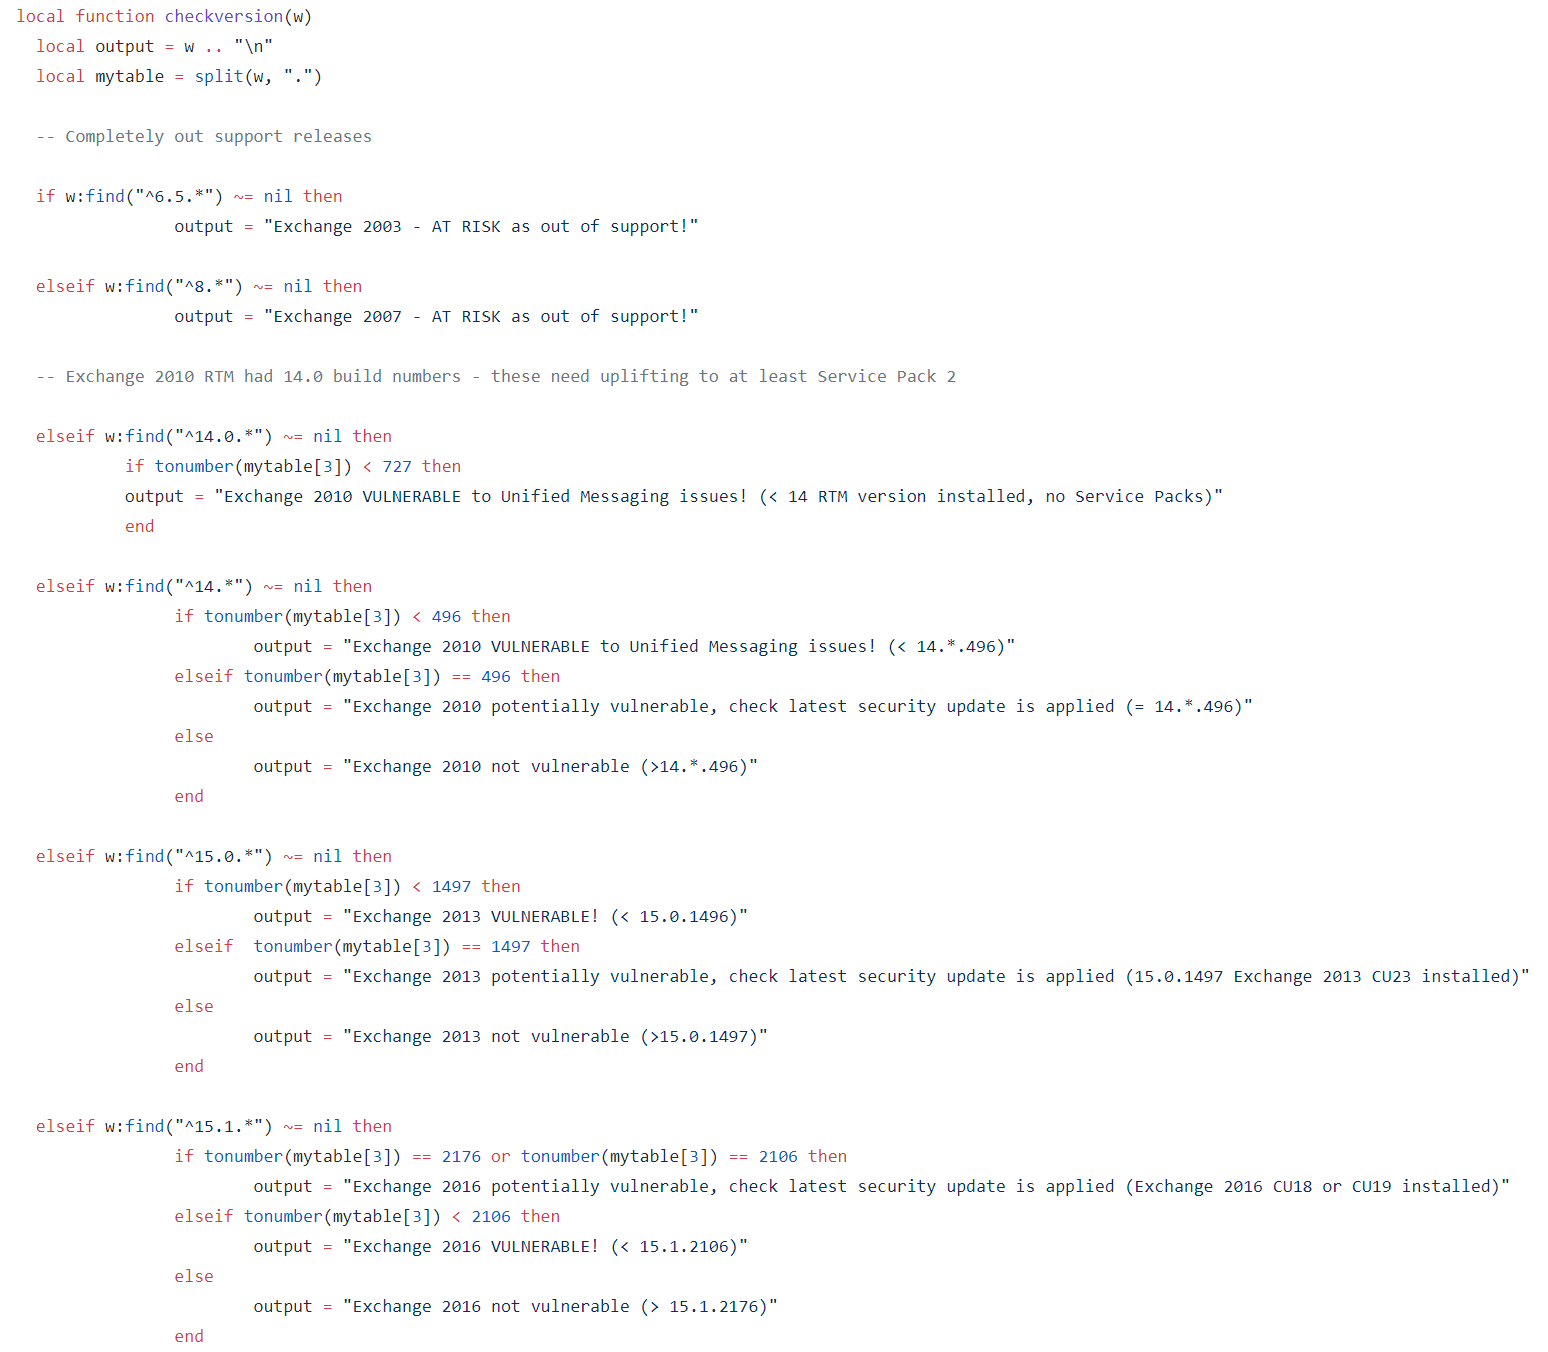 A code snippet from the scanning script